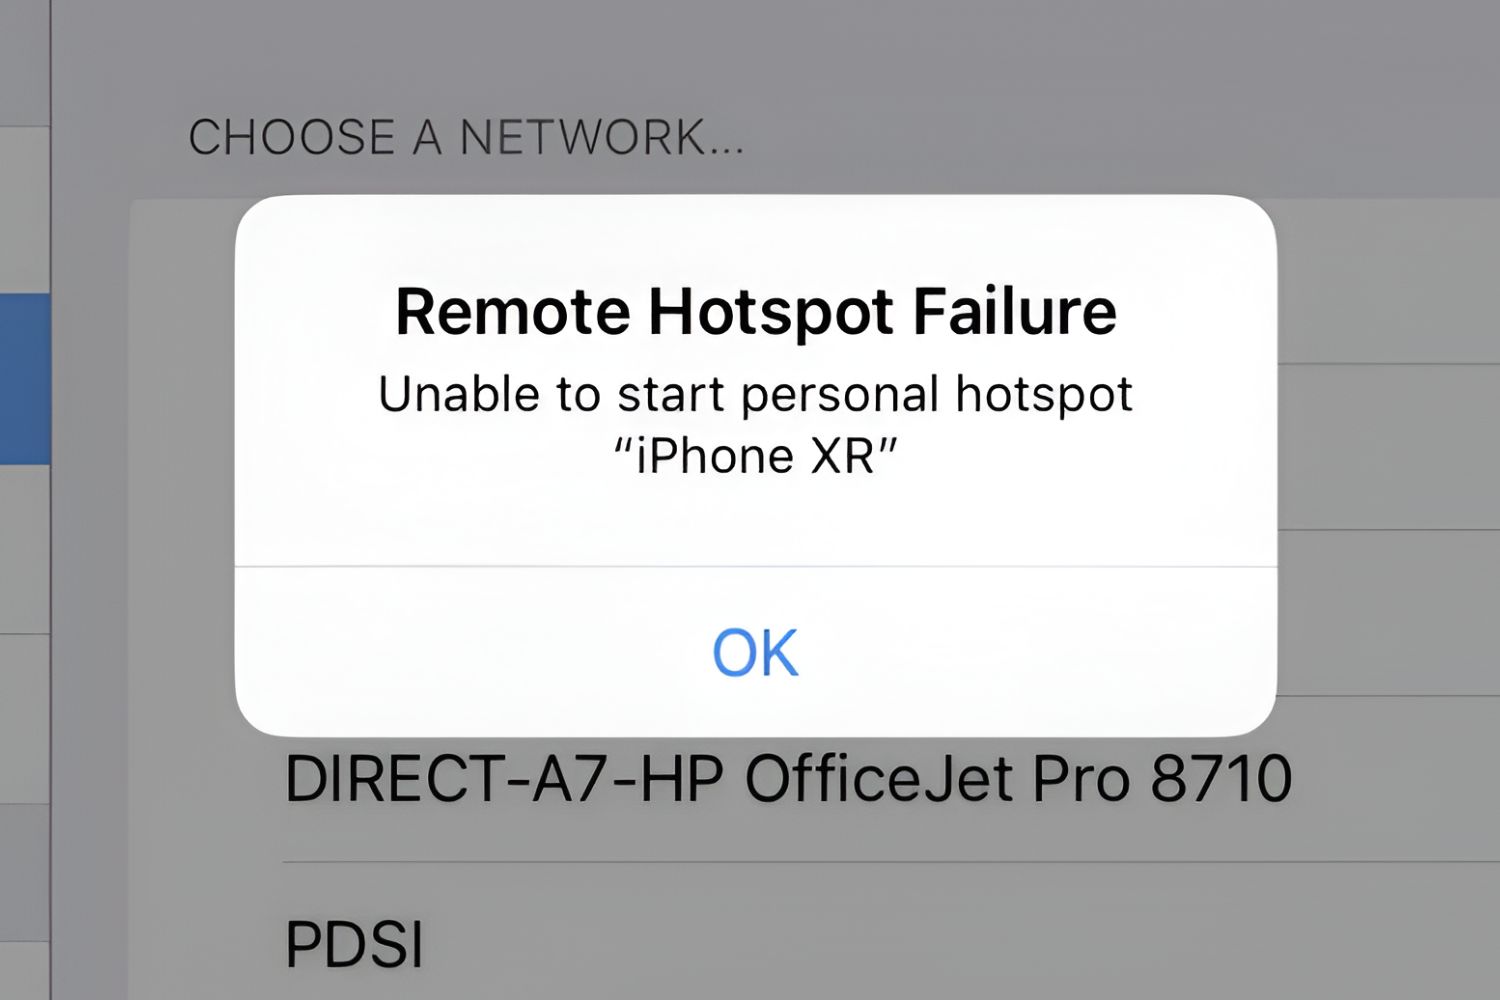 fixing-remote-hotspot-failure-troubleshooting-tips